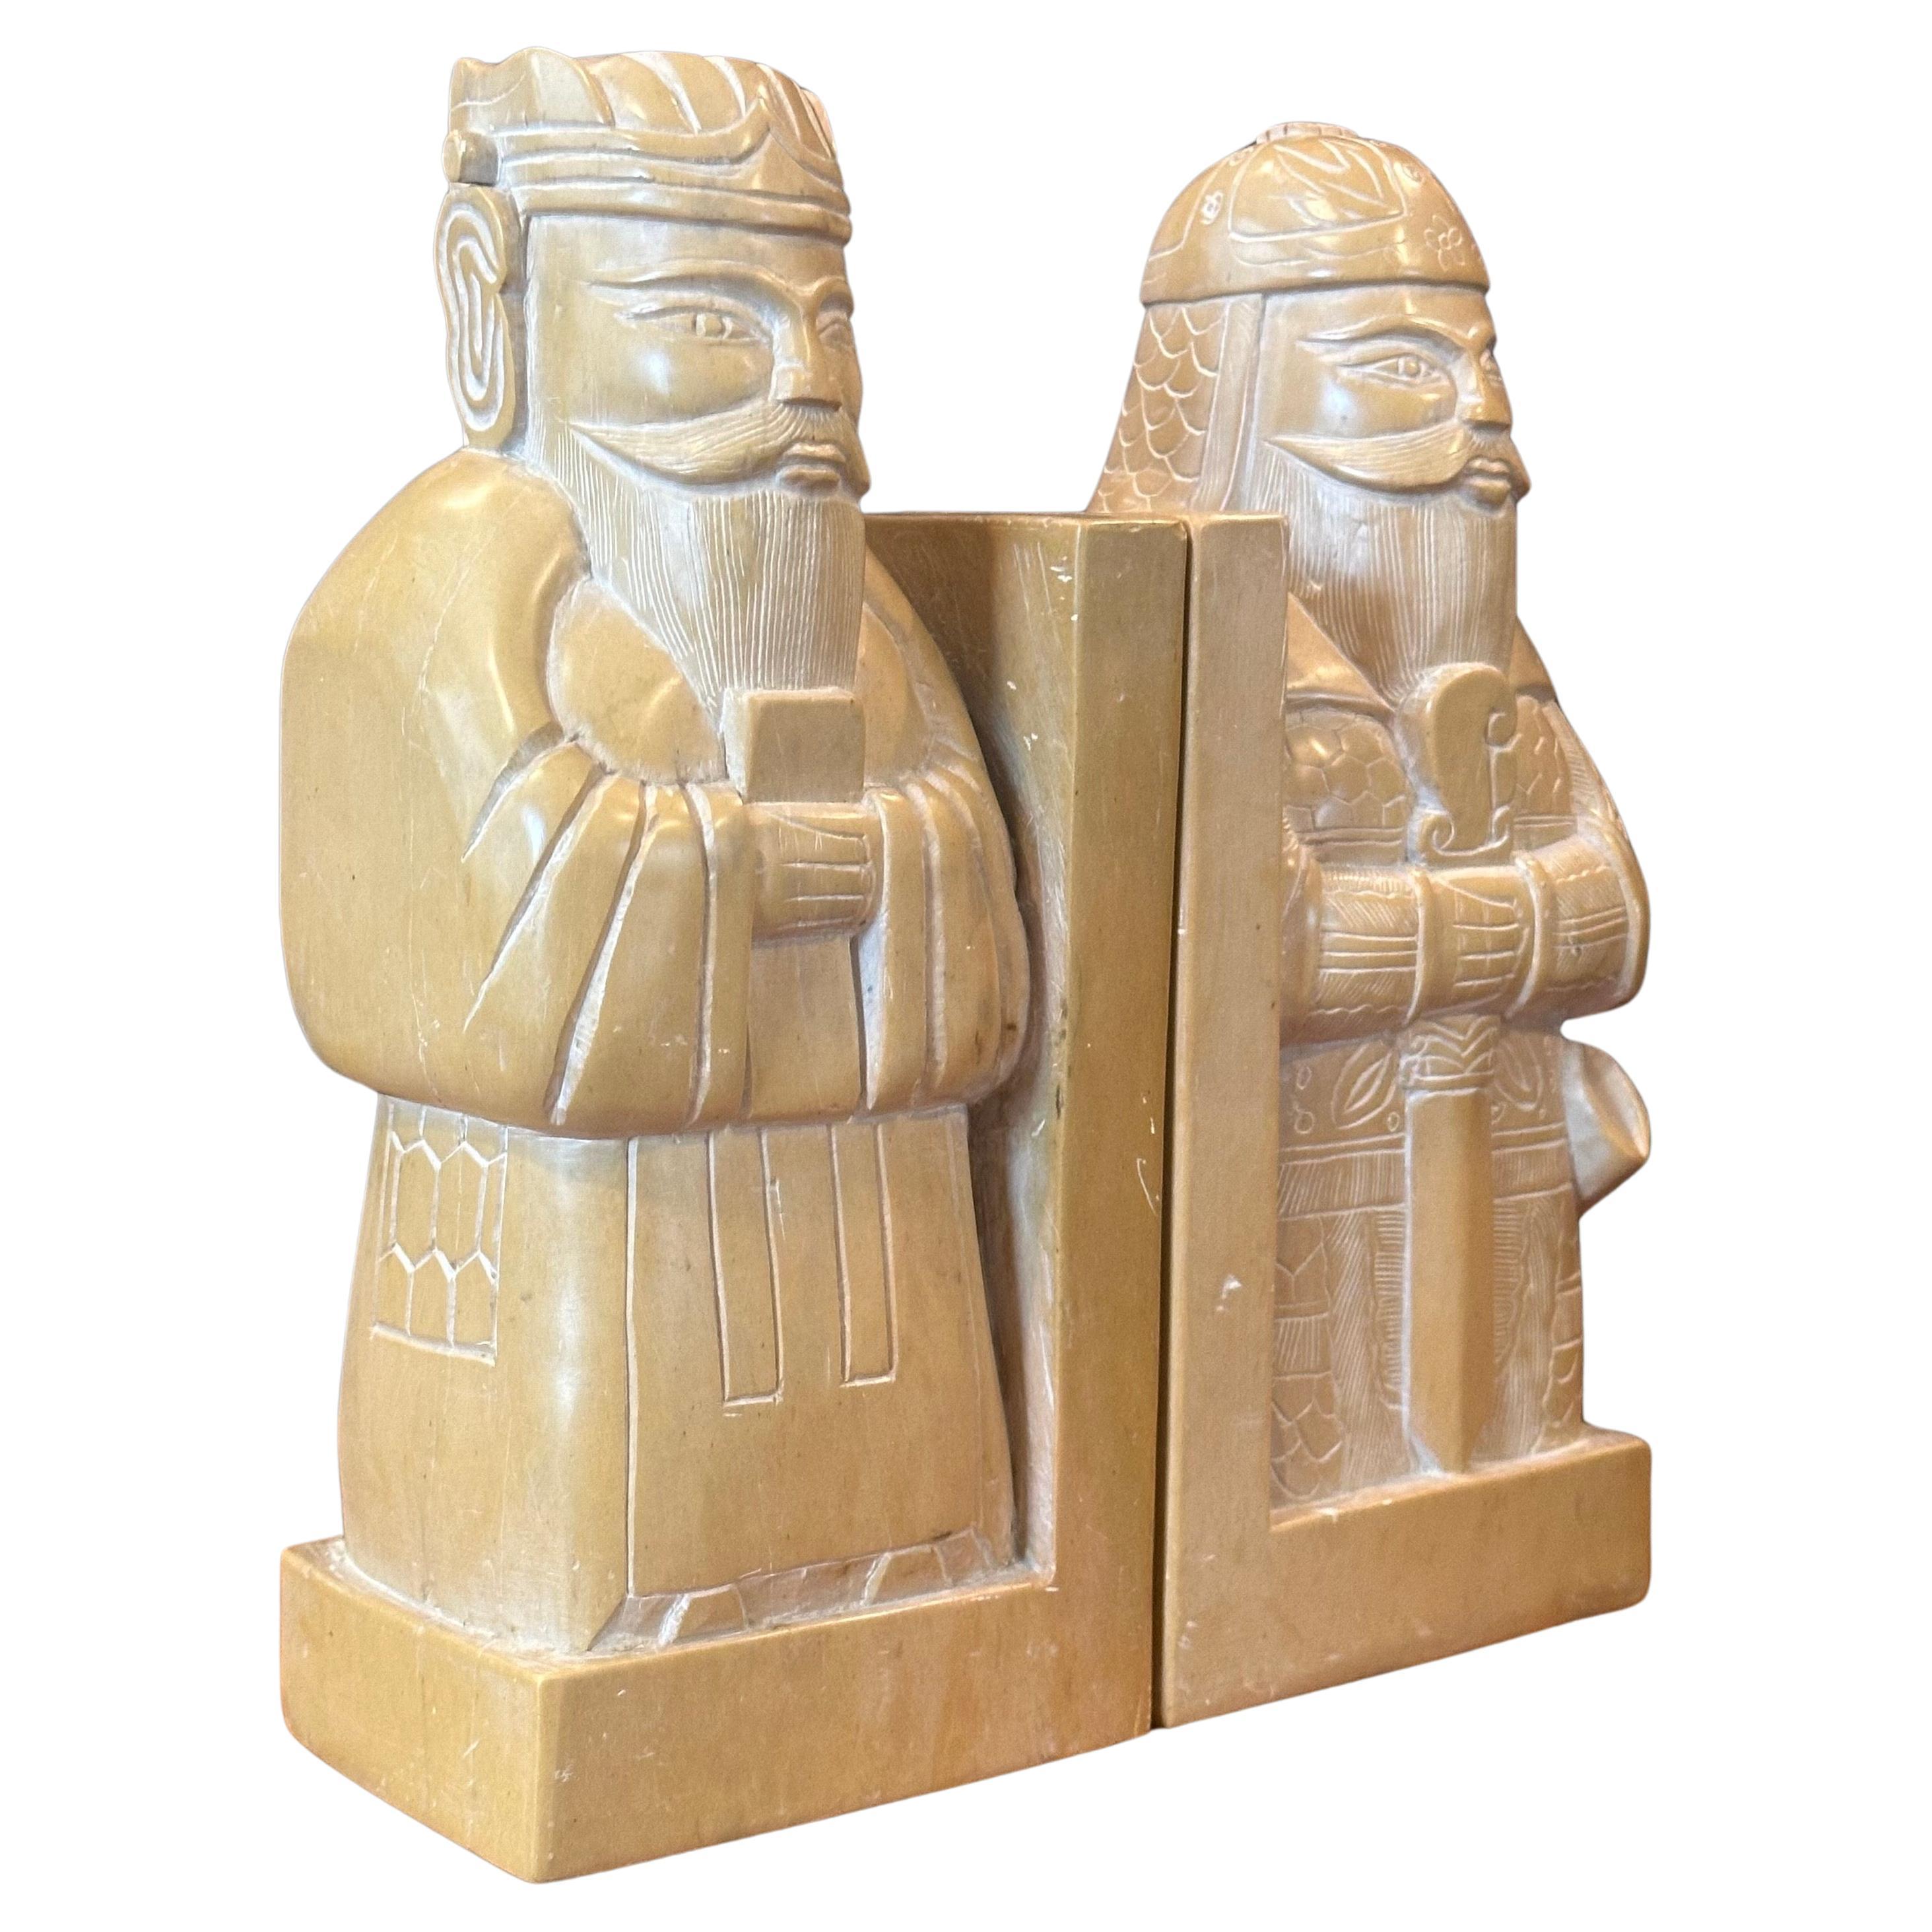 A fabulous vintage pair of soapstone Chinese scholar bookends, circa 1980s. The bookends depict two Chinese scholars and are beautifully sculpted;. the set is in very good vintage condition and measures 8